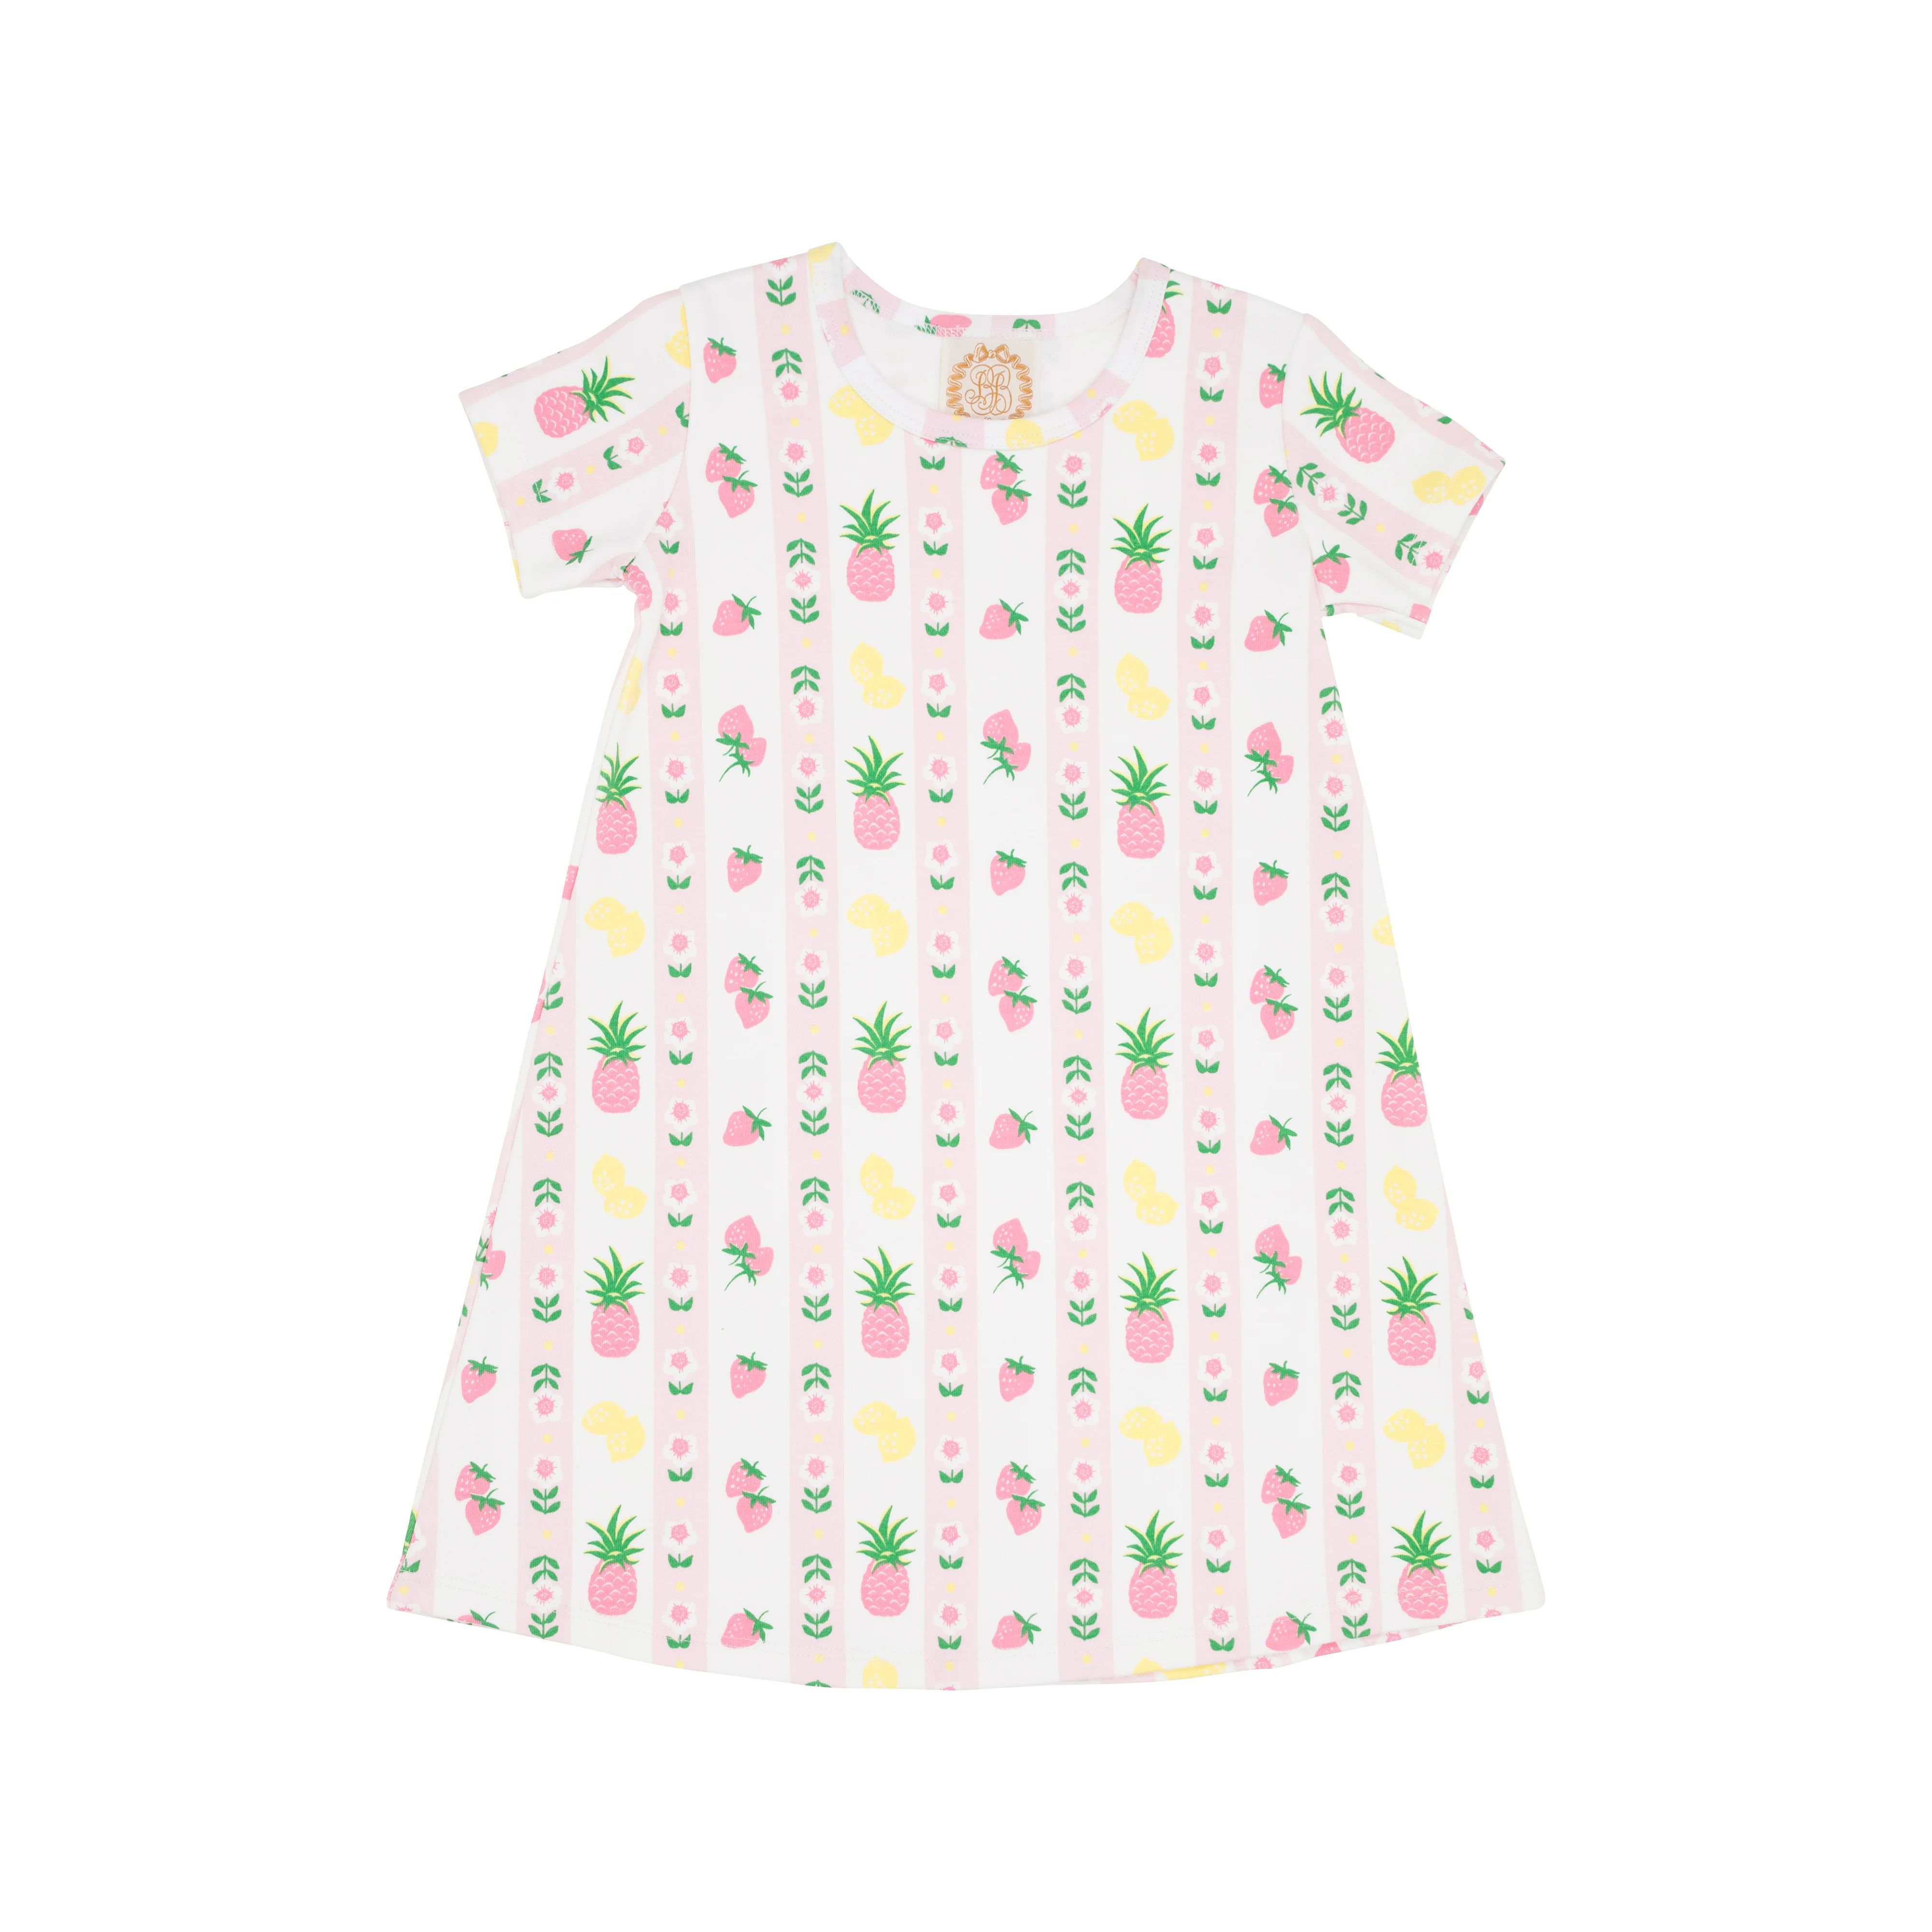 Polly Play Dress - Fruit Punch and Petals | The Beaufort Bonnet Company